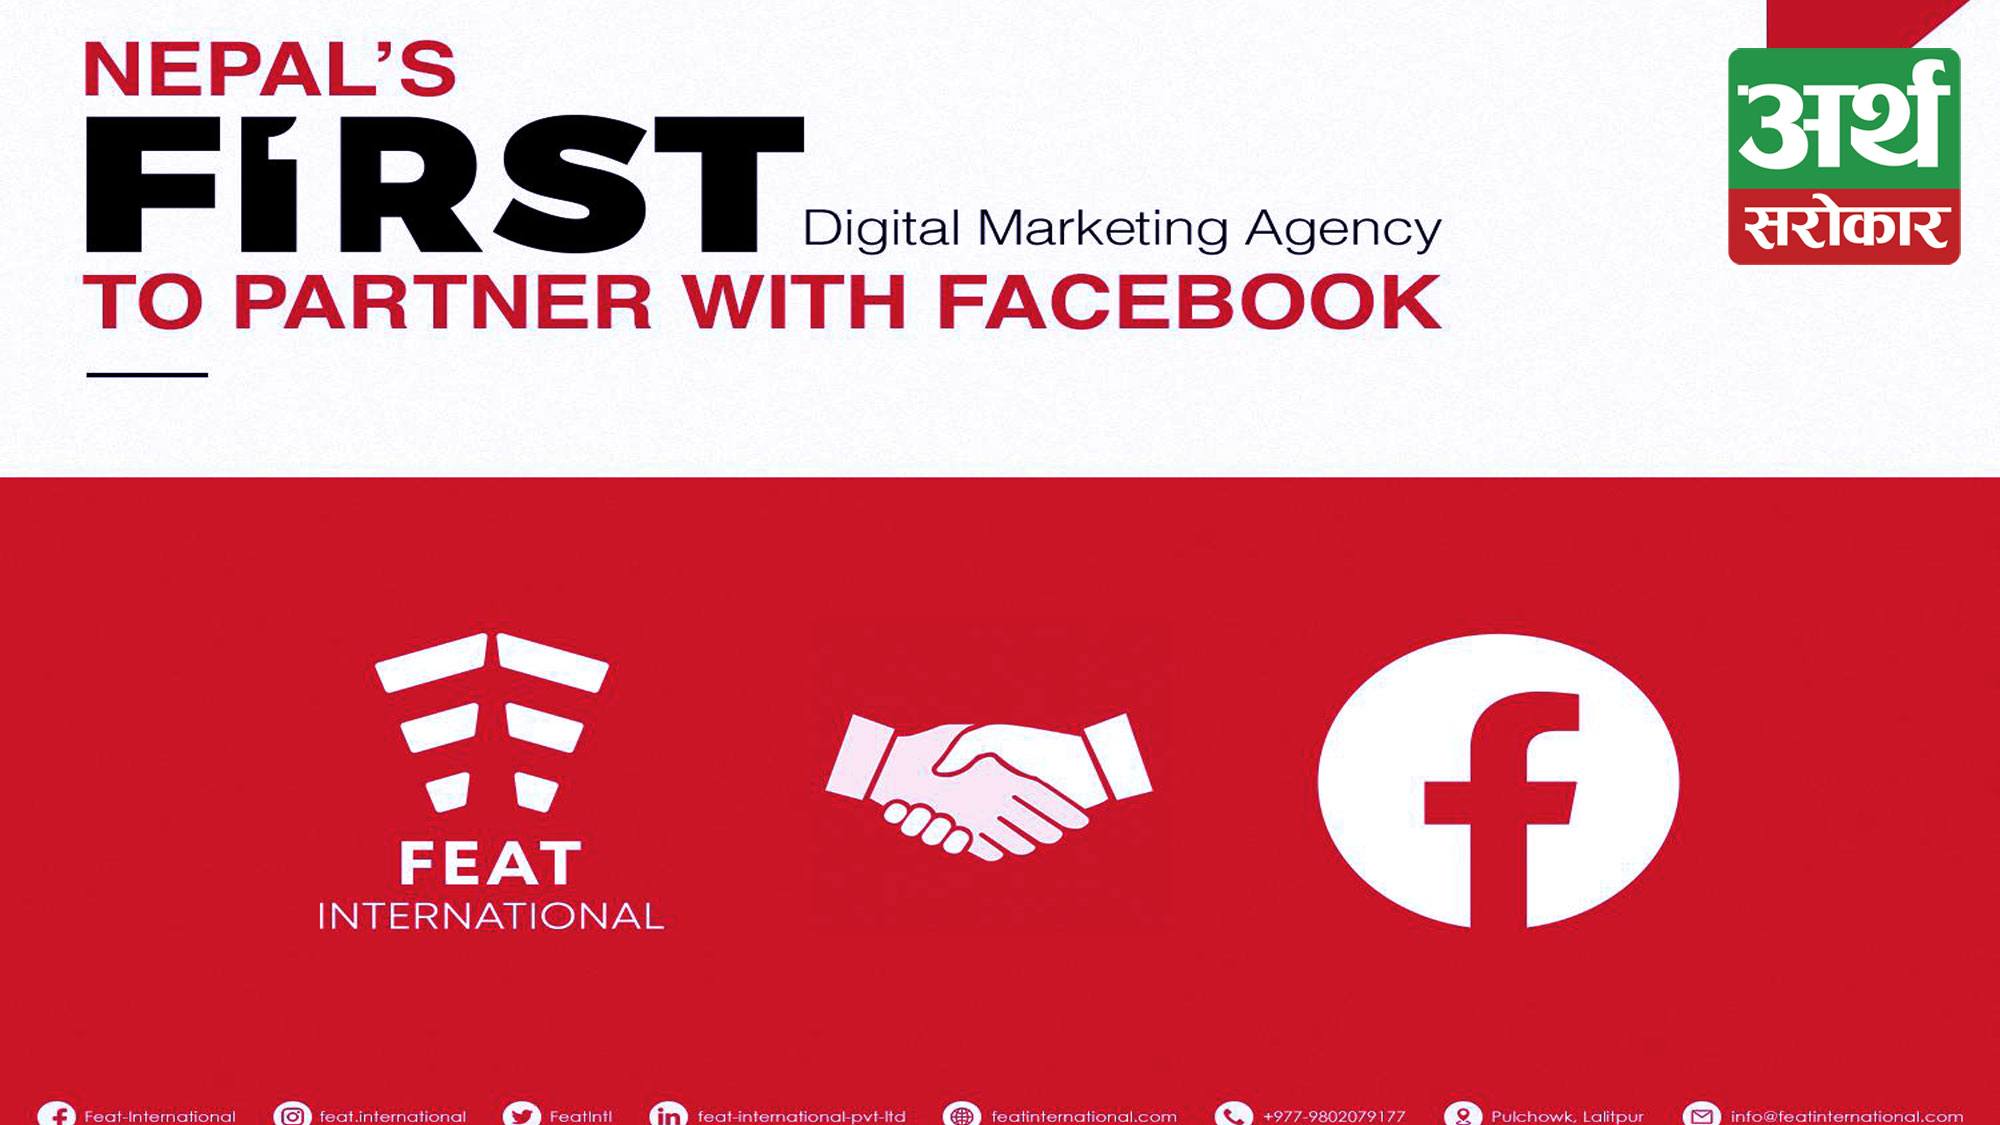 Feat International becomes Nepal’s first digital marketing agency to partner with Facebook